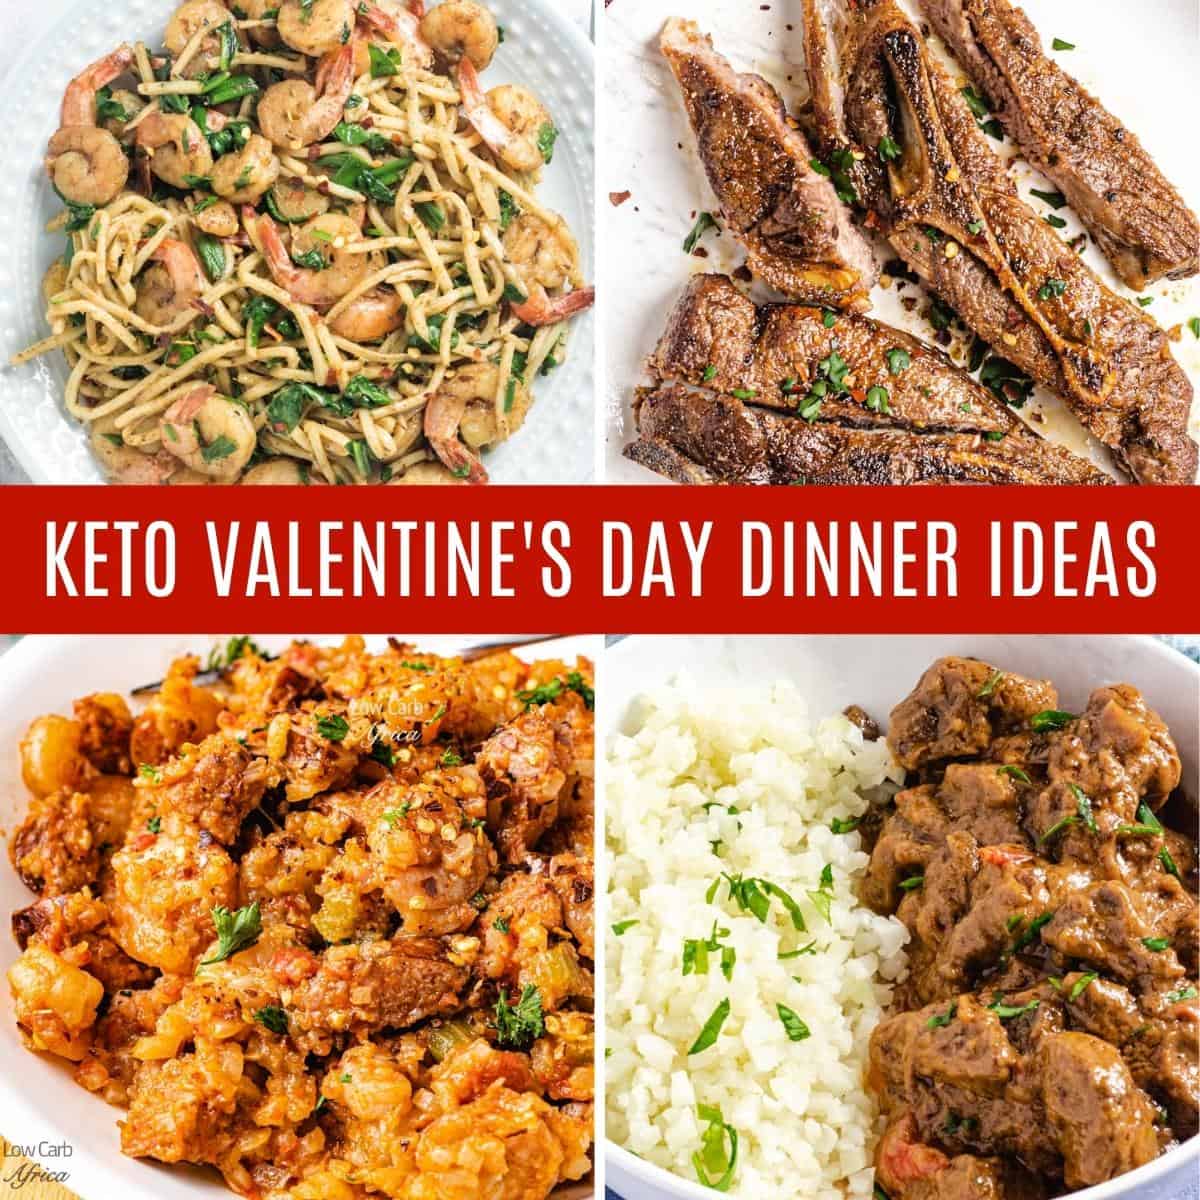 8 Keto Valentine's Day Dinner Ideas - Low Carb Africa